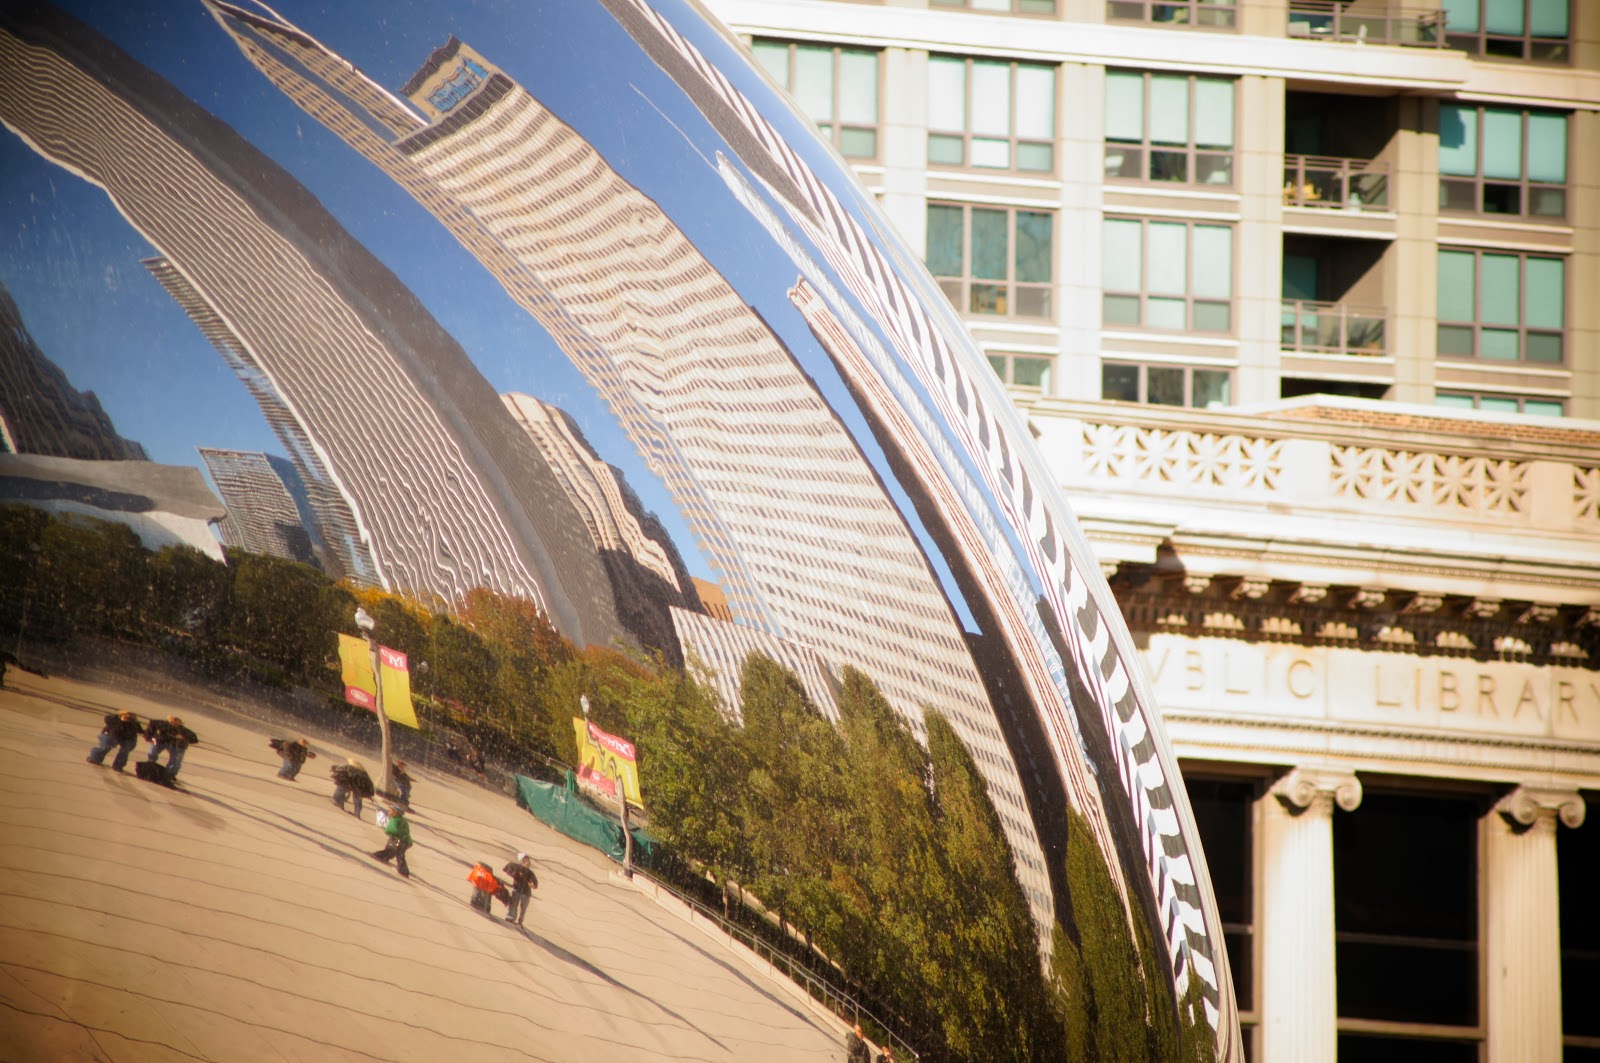 [Cloud-gate-anish-kapoor-free-pictures-1%2520%25283%2529%255B3%255D.jpg]